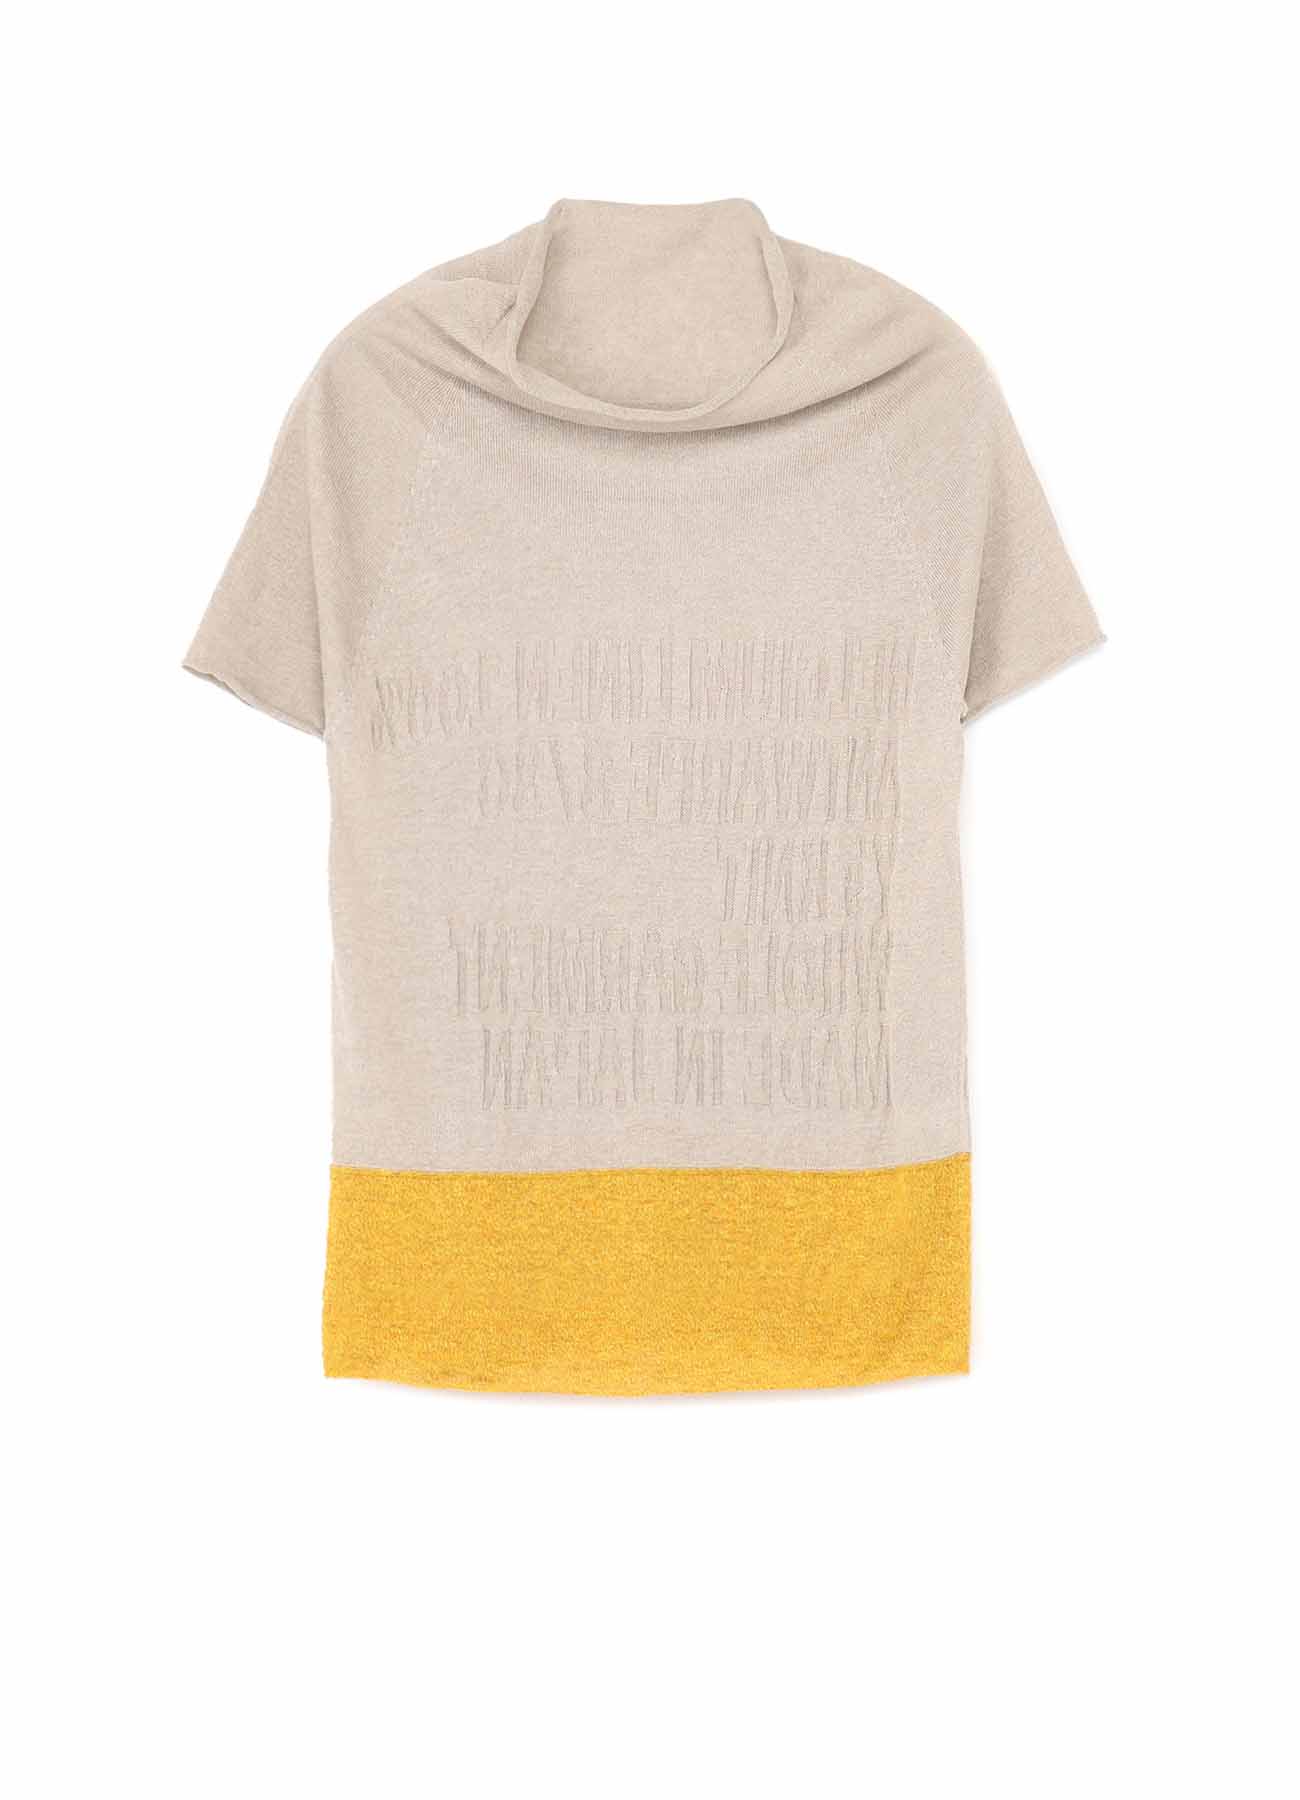 LINEN MESSAGE LINKS OFF NECK FRENCH SLEEVE